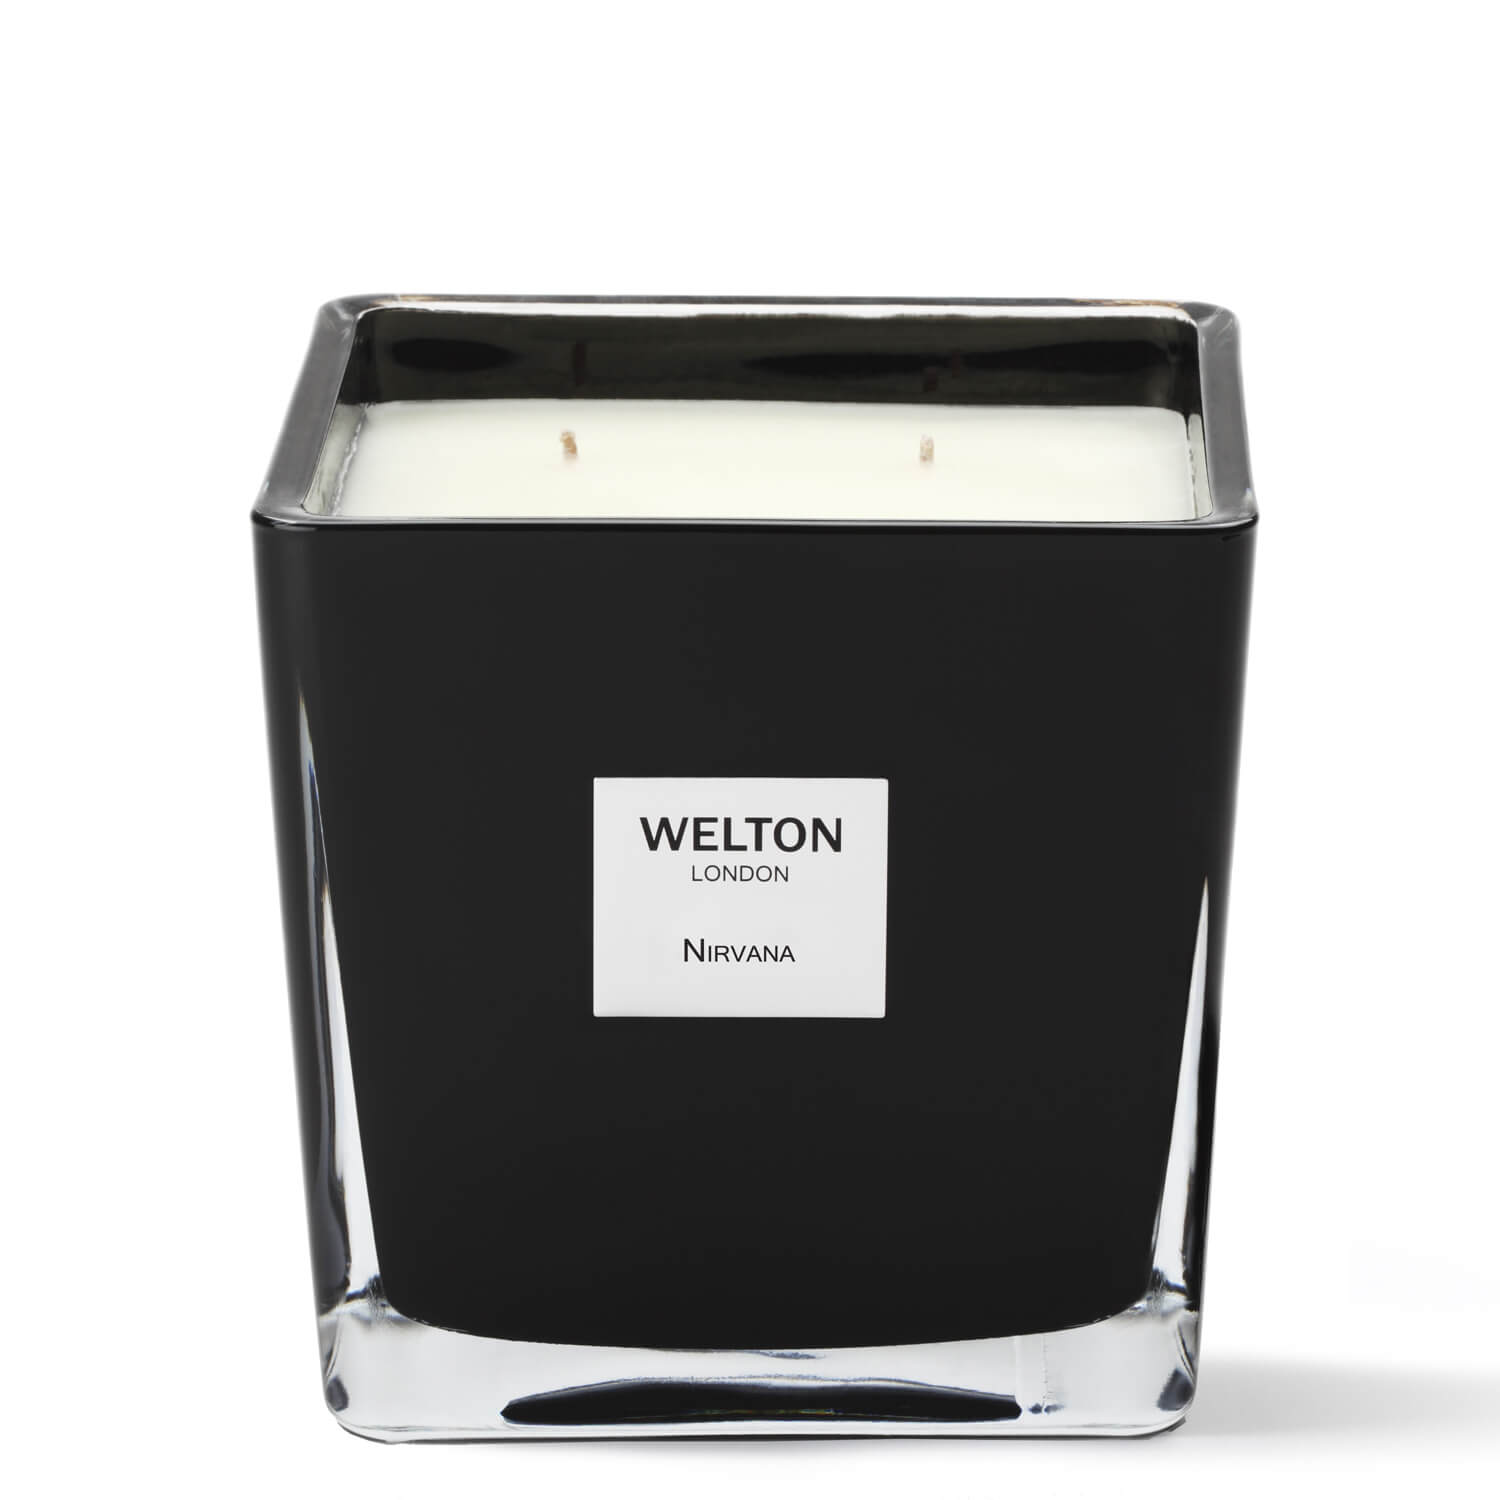 welton london candle nirvana large
fruity - floral - musky scented candles 